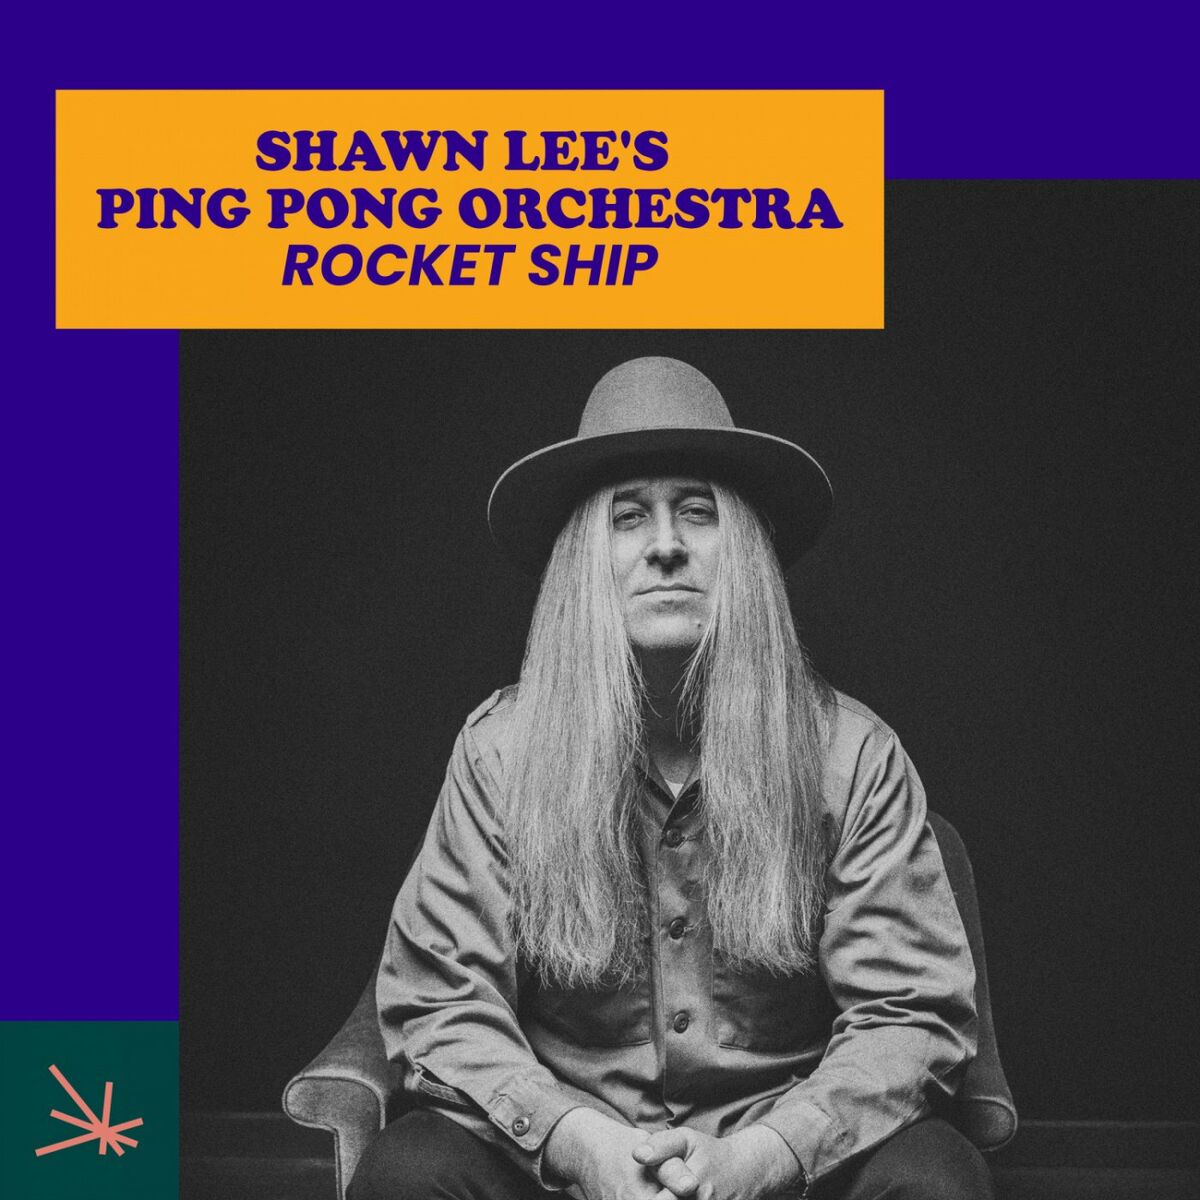 Shawn Lee's Ping Pong Orchestra: albums